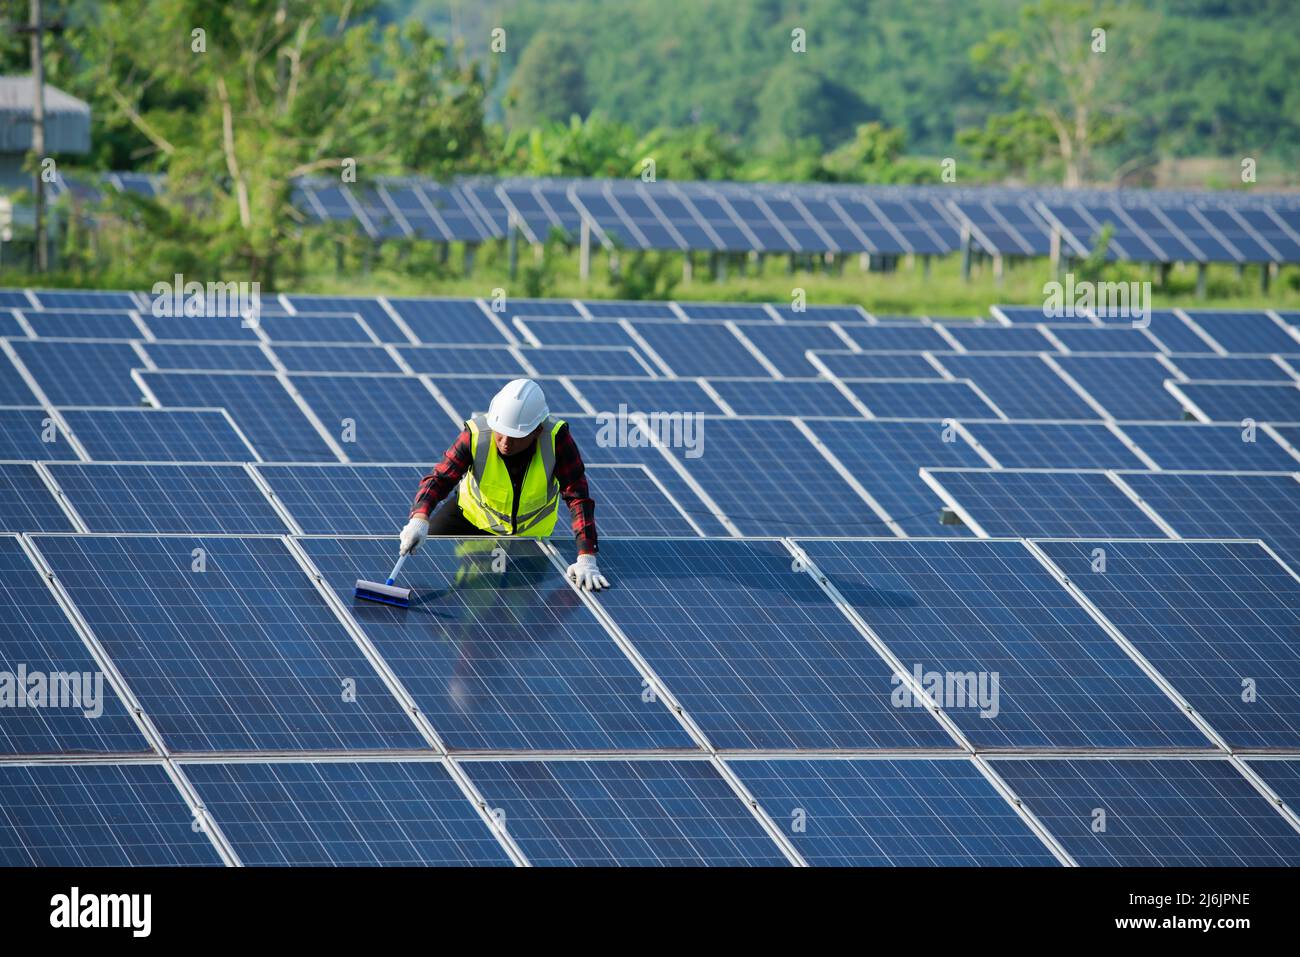 Cleaning solar panels by workers in uniform safety at solar farm Stock Photo